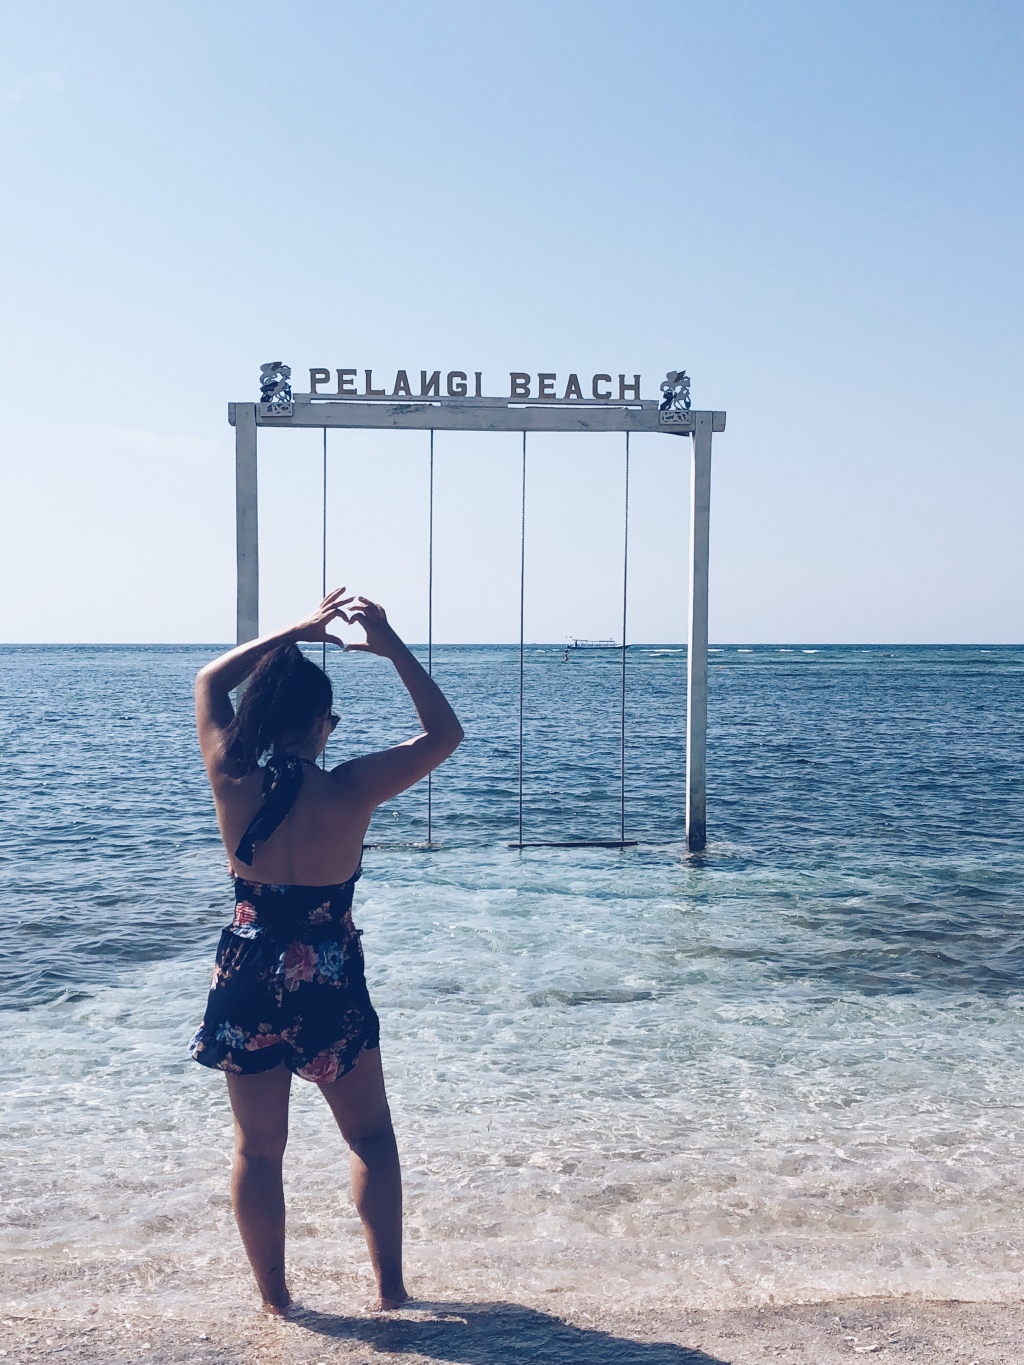 From Bali with Love: Gili Air